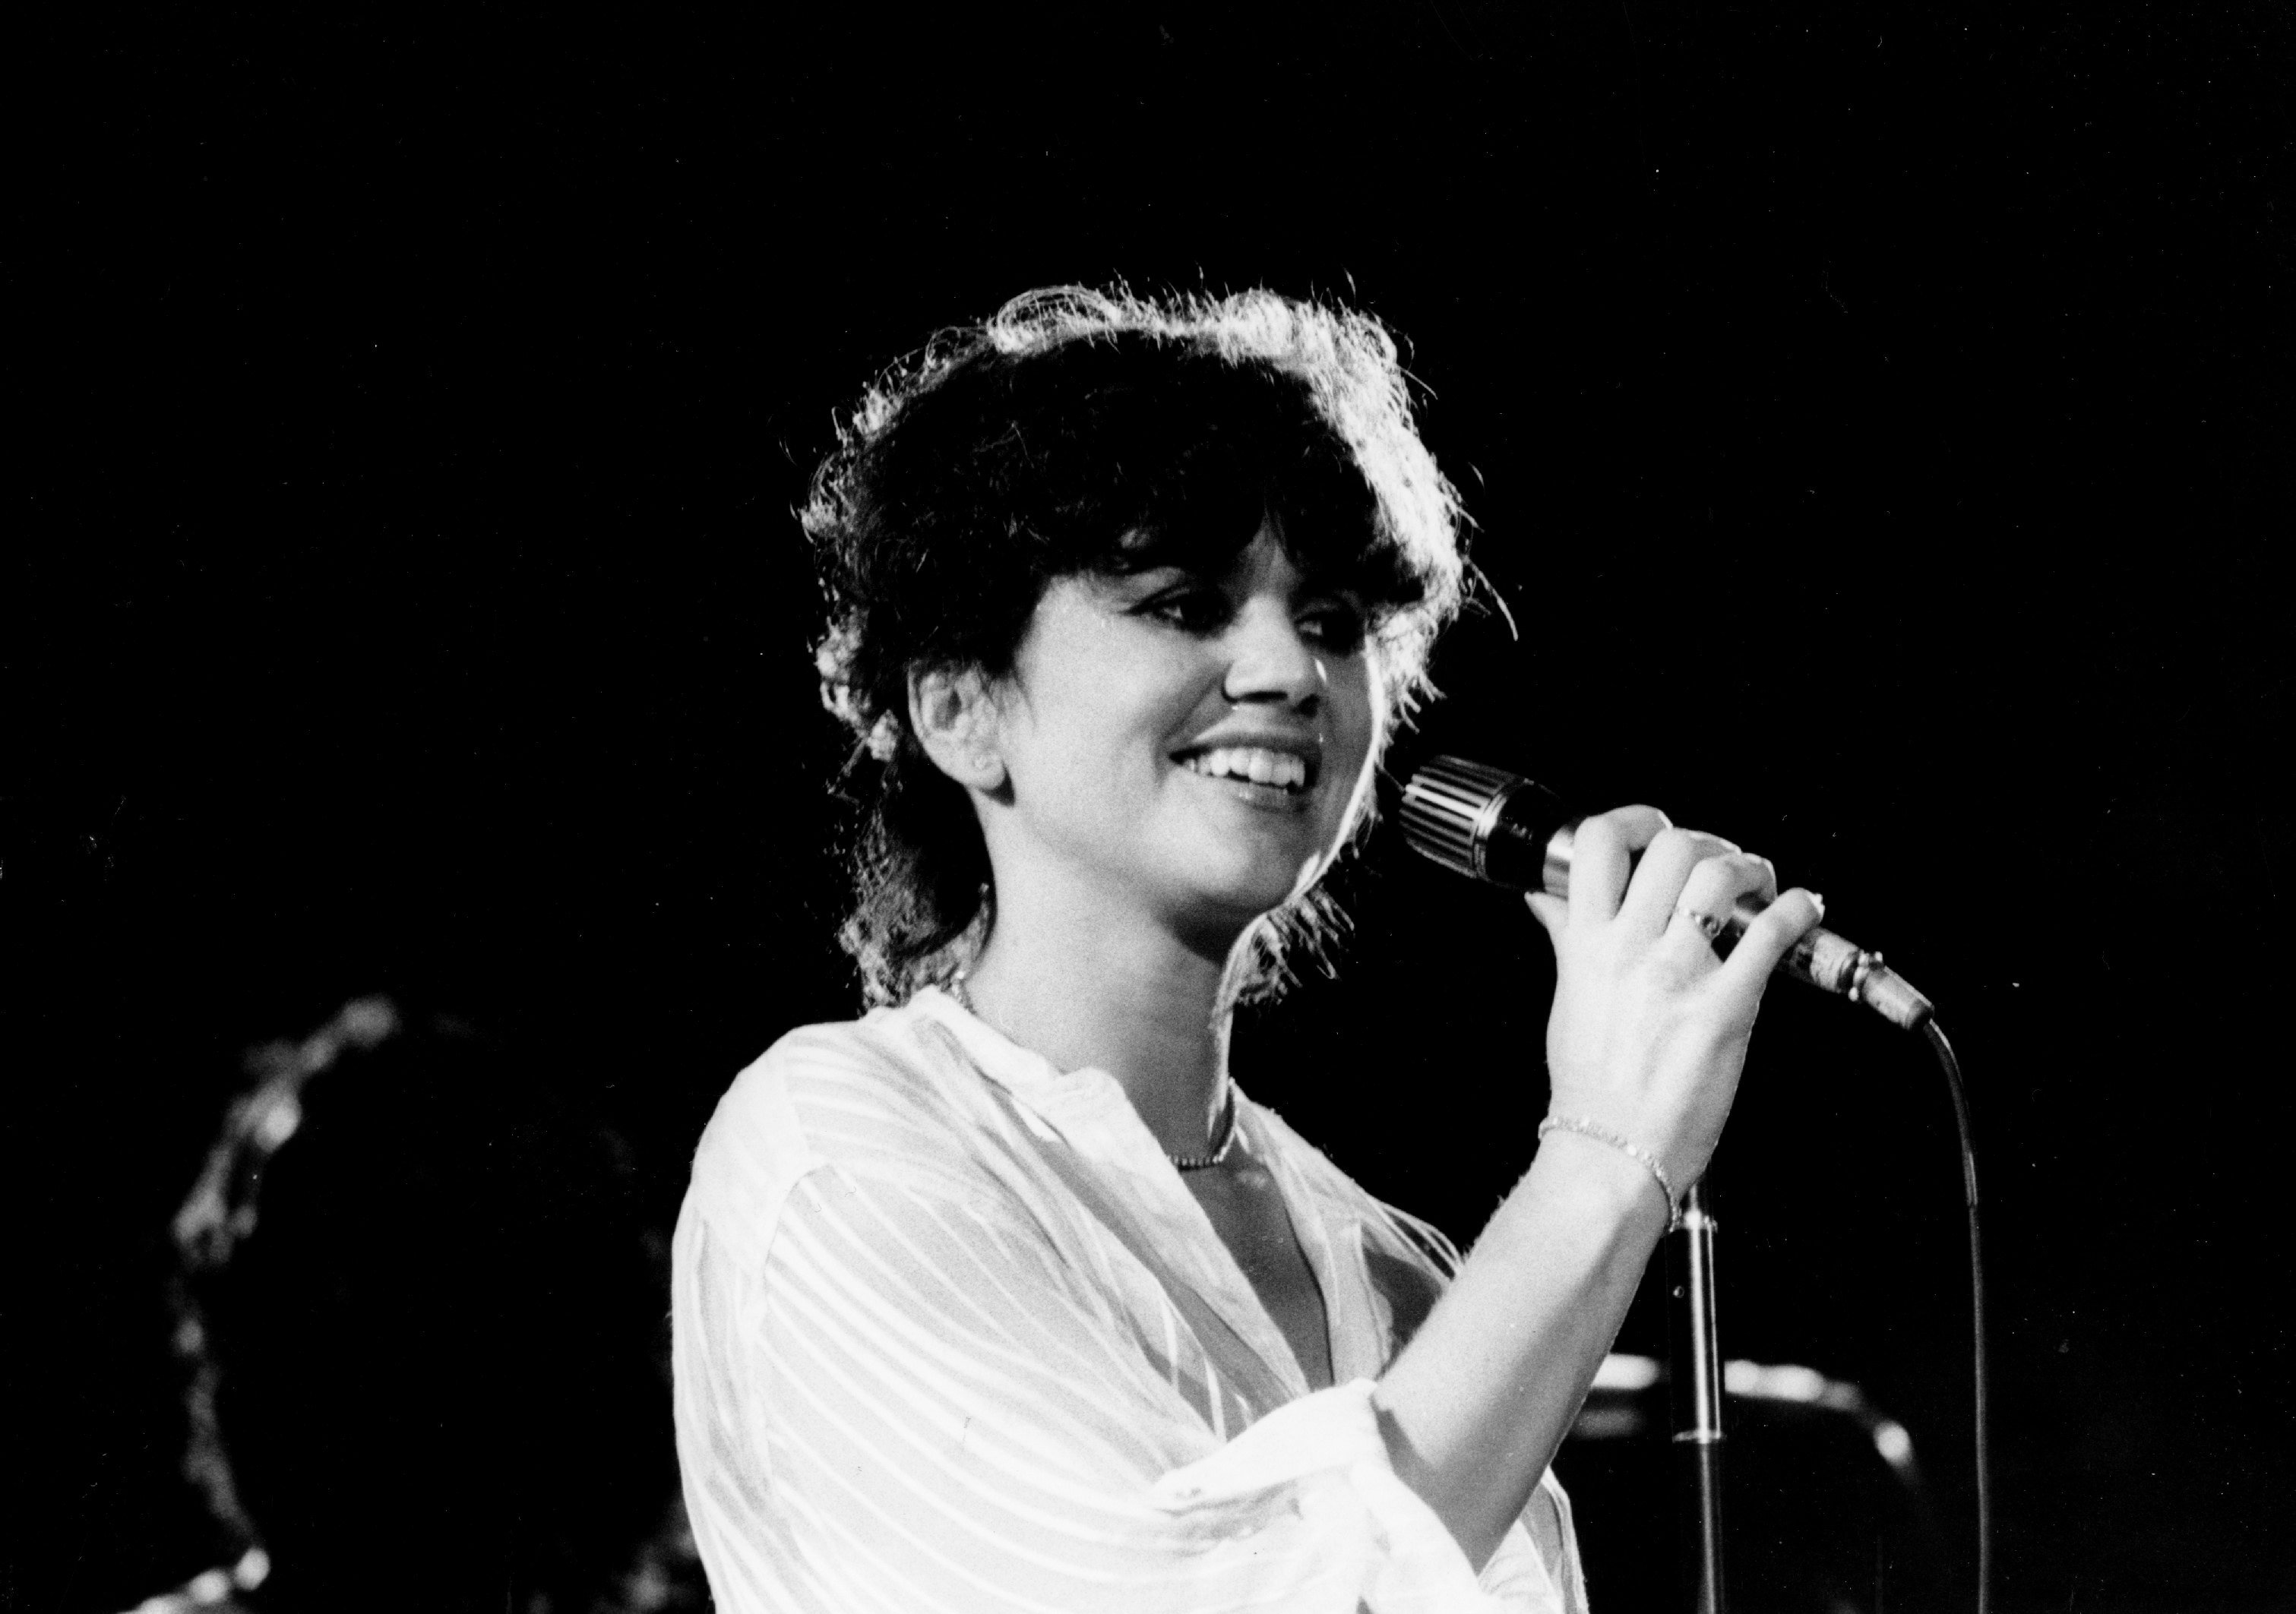 International superstar Linda Ronstadt pictured singing on stage on January 1, 1970.┃Source: Getty Images